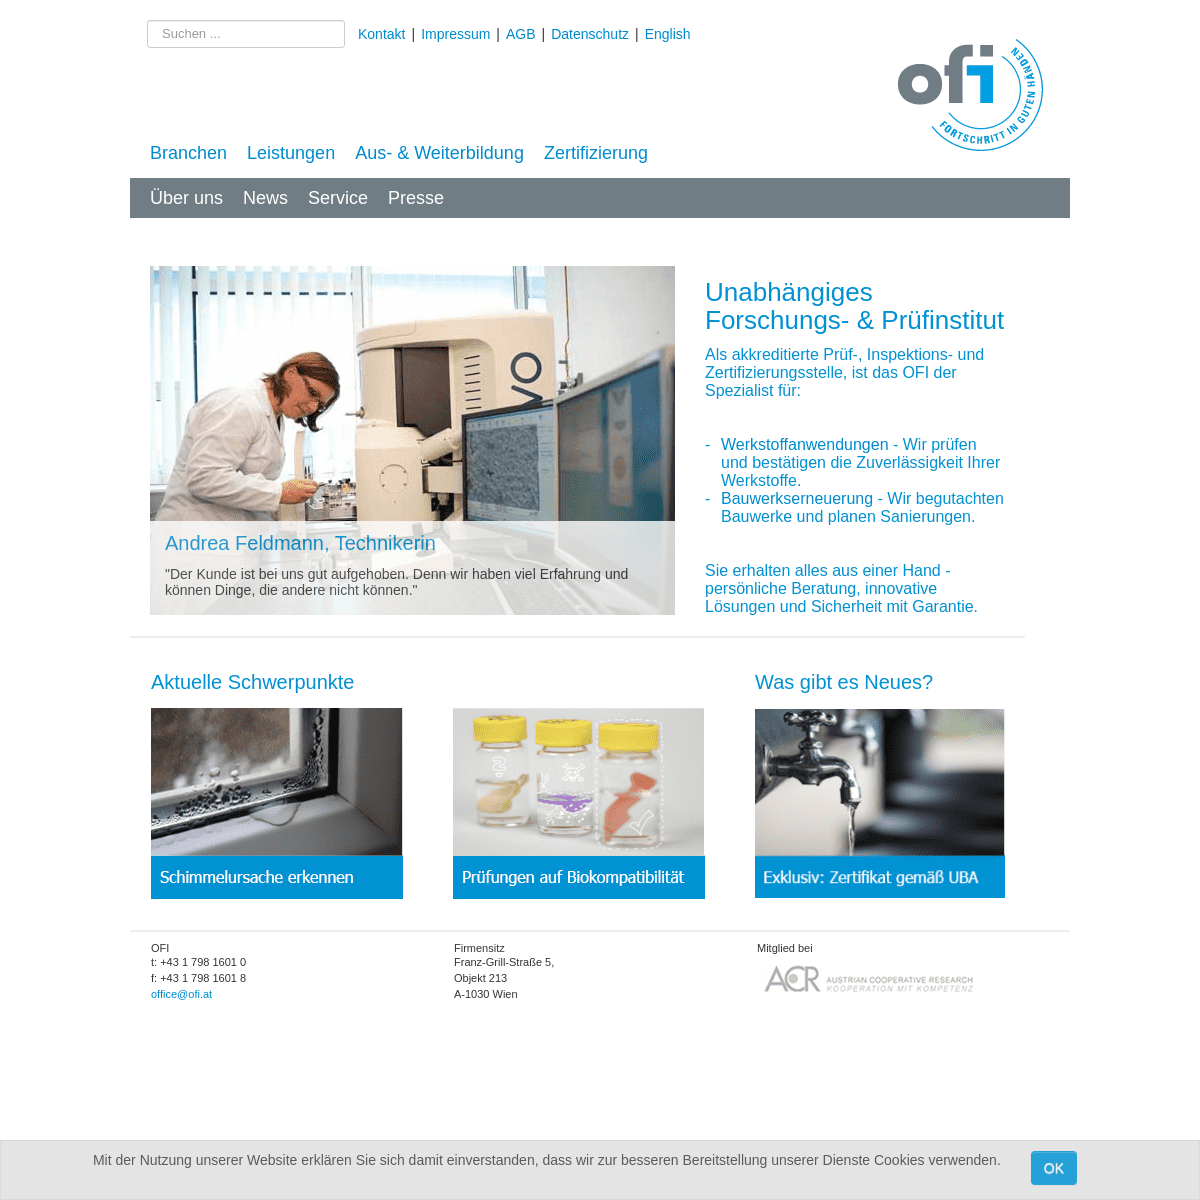 A complete backup of ofi.at